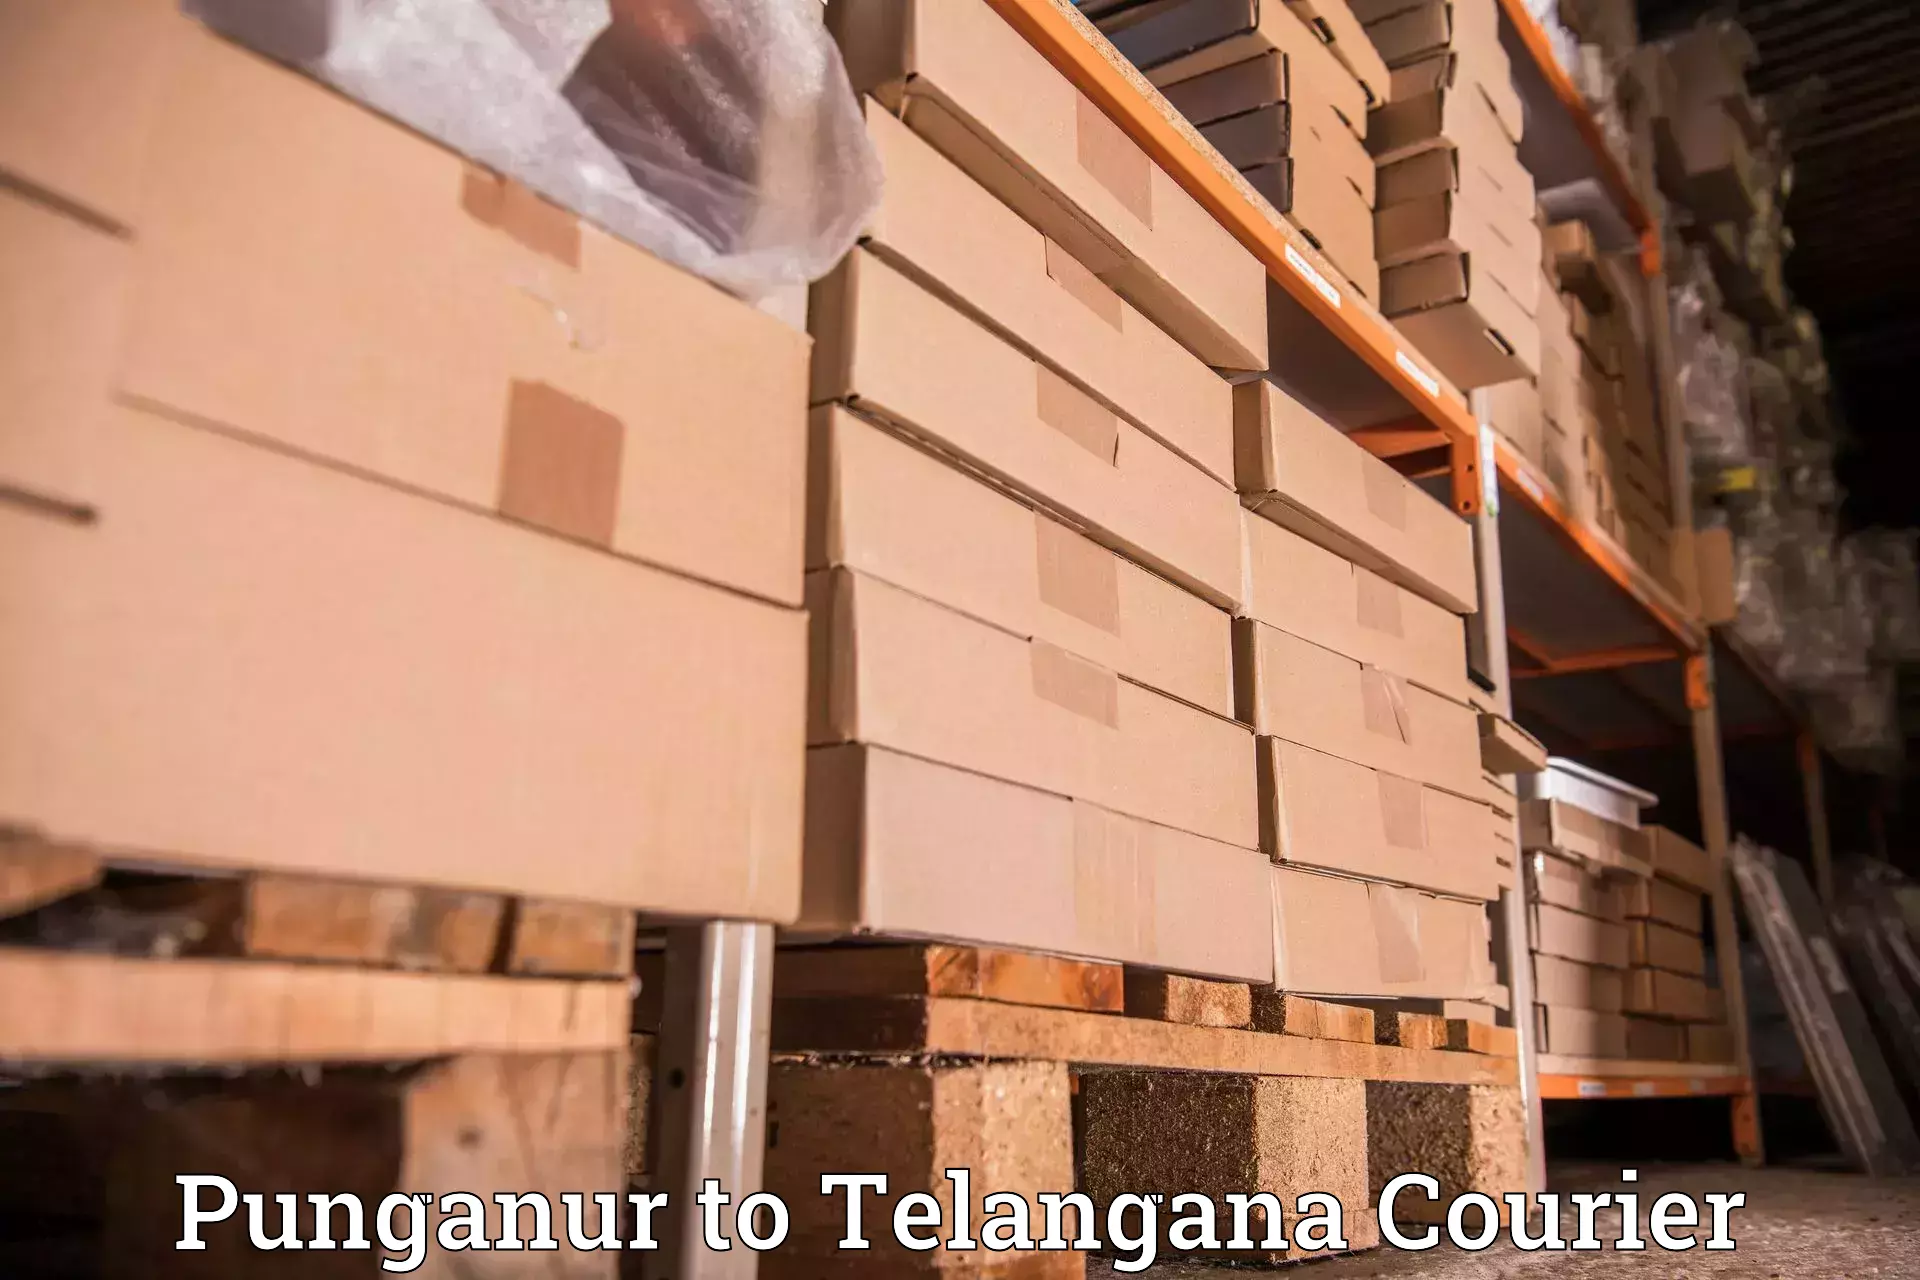 Courier insurance Punganur to Trimulgherry